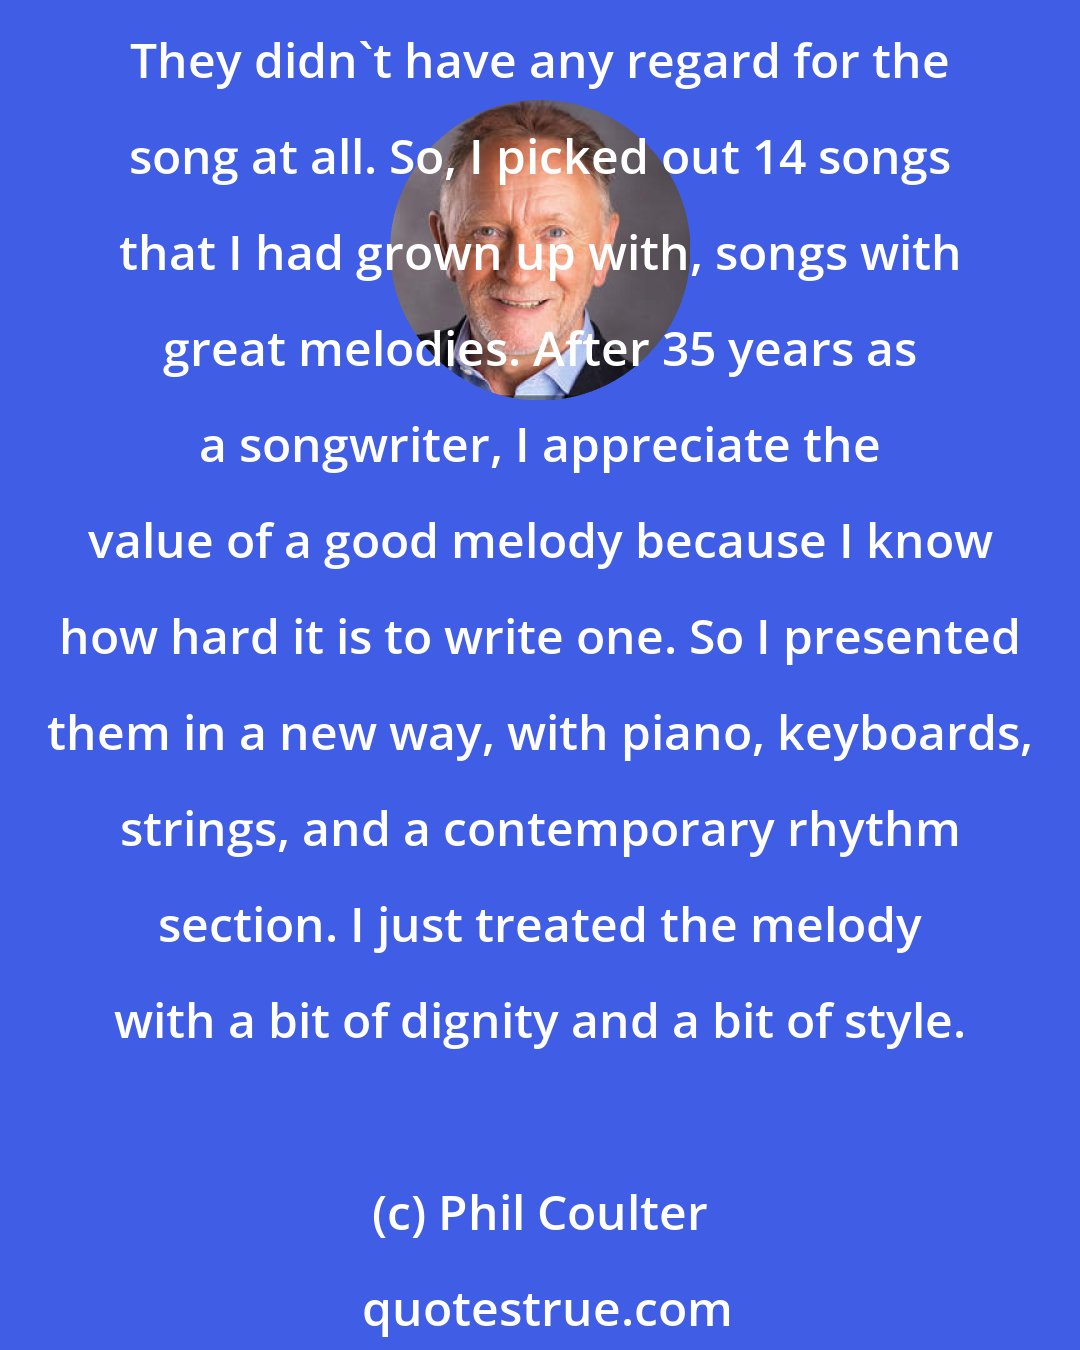 Phil Coulter: It was a matter of not seeing the woods for the trees. Glorious songs have been in Ireland forever, but a lot of these were so popular they were sung only by drunken men at weddings. They didn't have any regard for the song at all. So, I picked out 14 songs that I had grown up with, songs with great melodies. After 35 years as a songwriter, I appreciate the value of a good melody because I know how hard it is to write one. So I presented them in a new way, with piano, keyboards, strings, and a contemporary rhythm section. I just treated the melody with a bit of dignity and a bit of style.